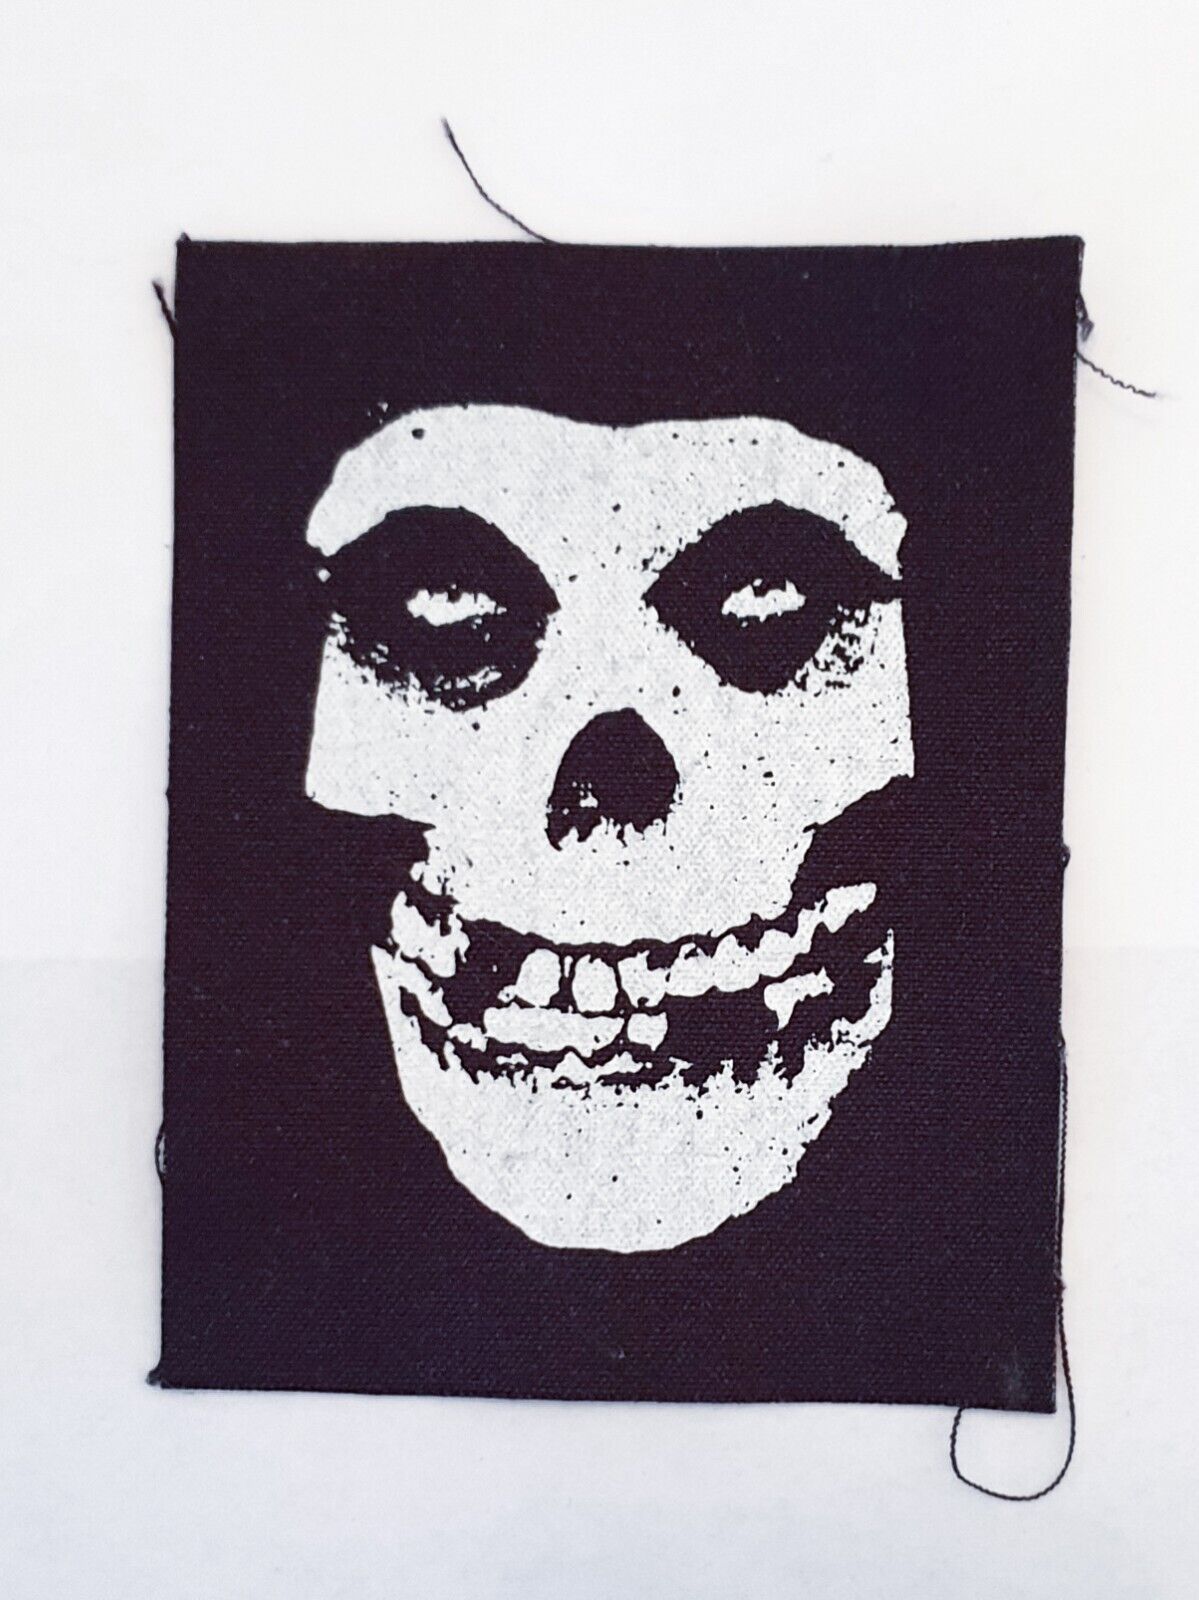 Misfits Band Logo Printed Square Sew On Patch Badge Festival Rock Music 80s